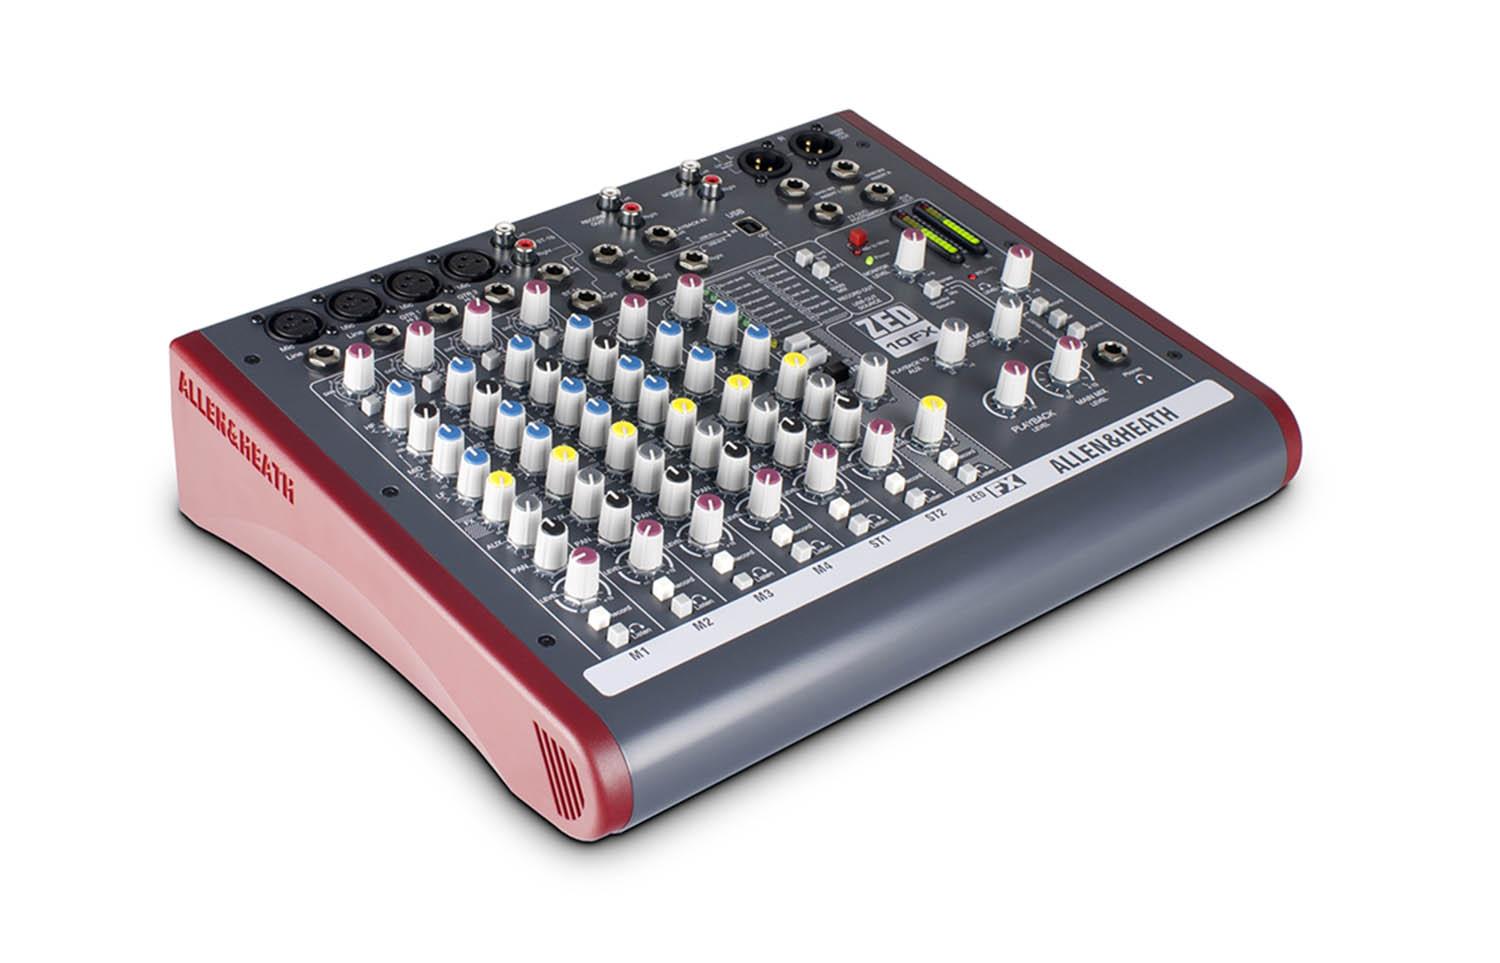 Allen & Heath AH-ZED-10FX Multipurpose Mixer with FX for Live Sound and Recording - Hollywood DJ